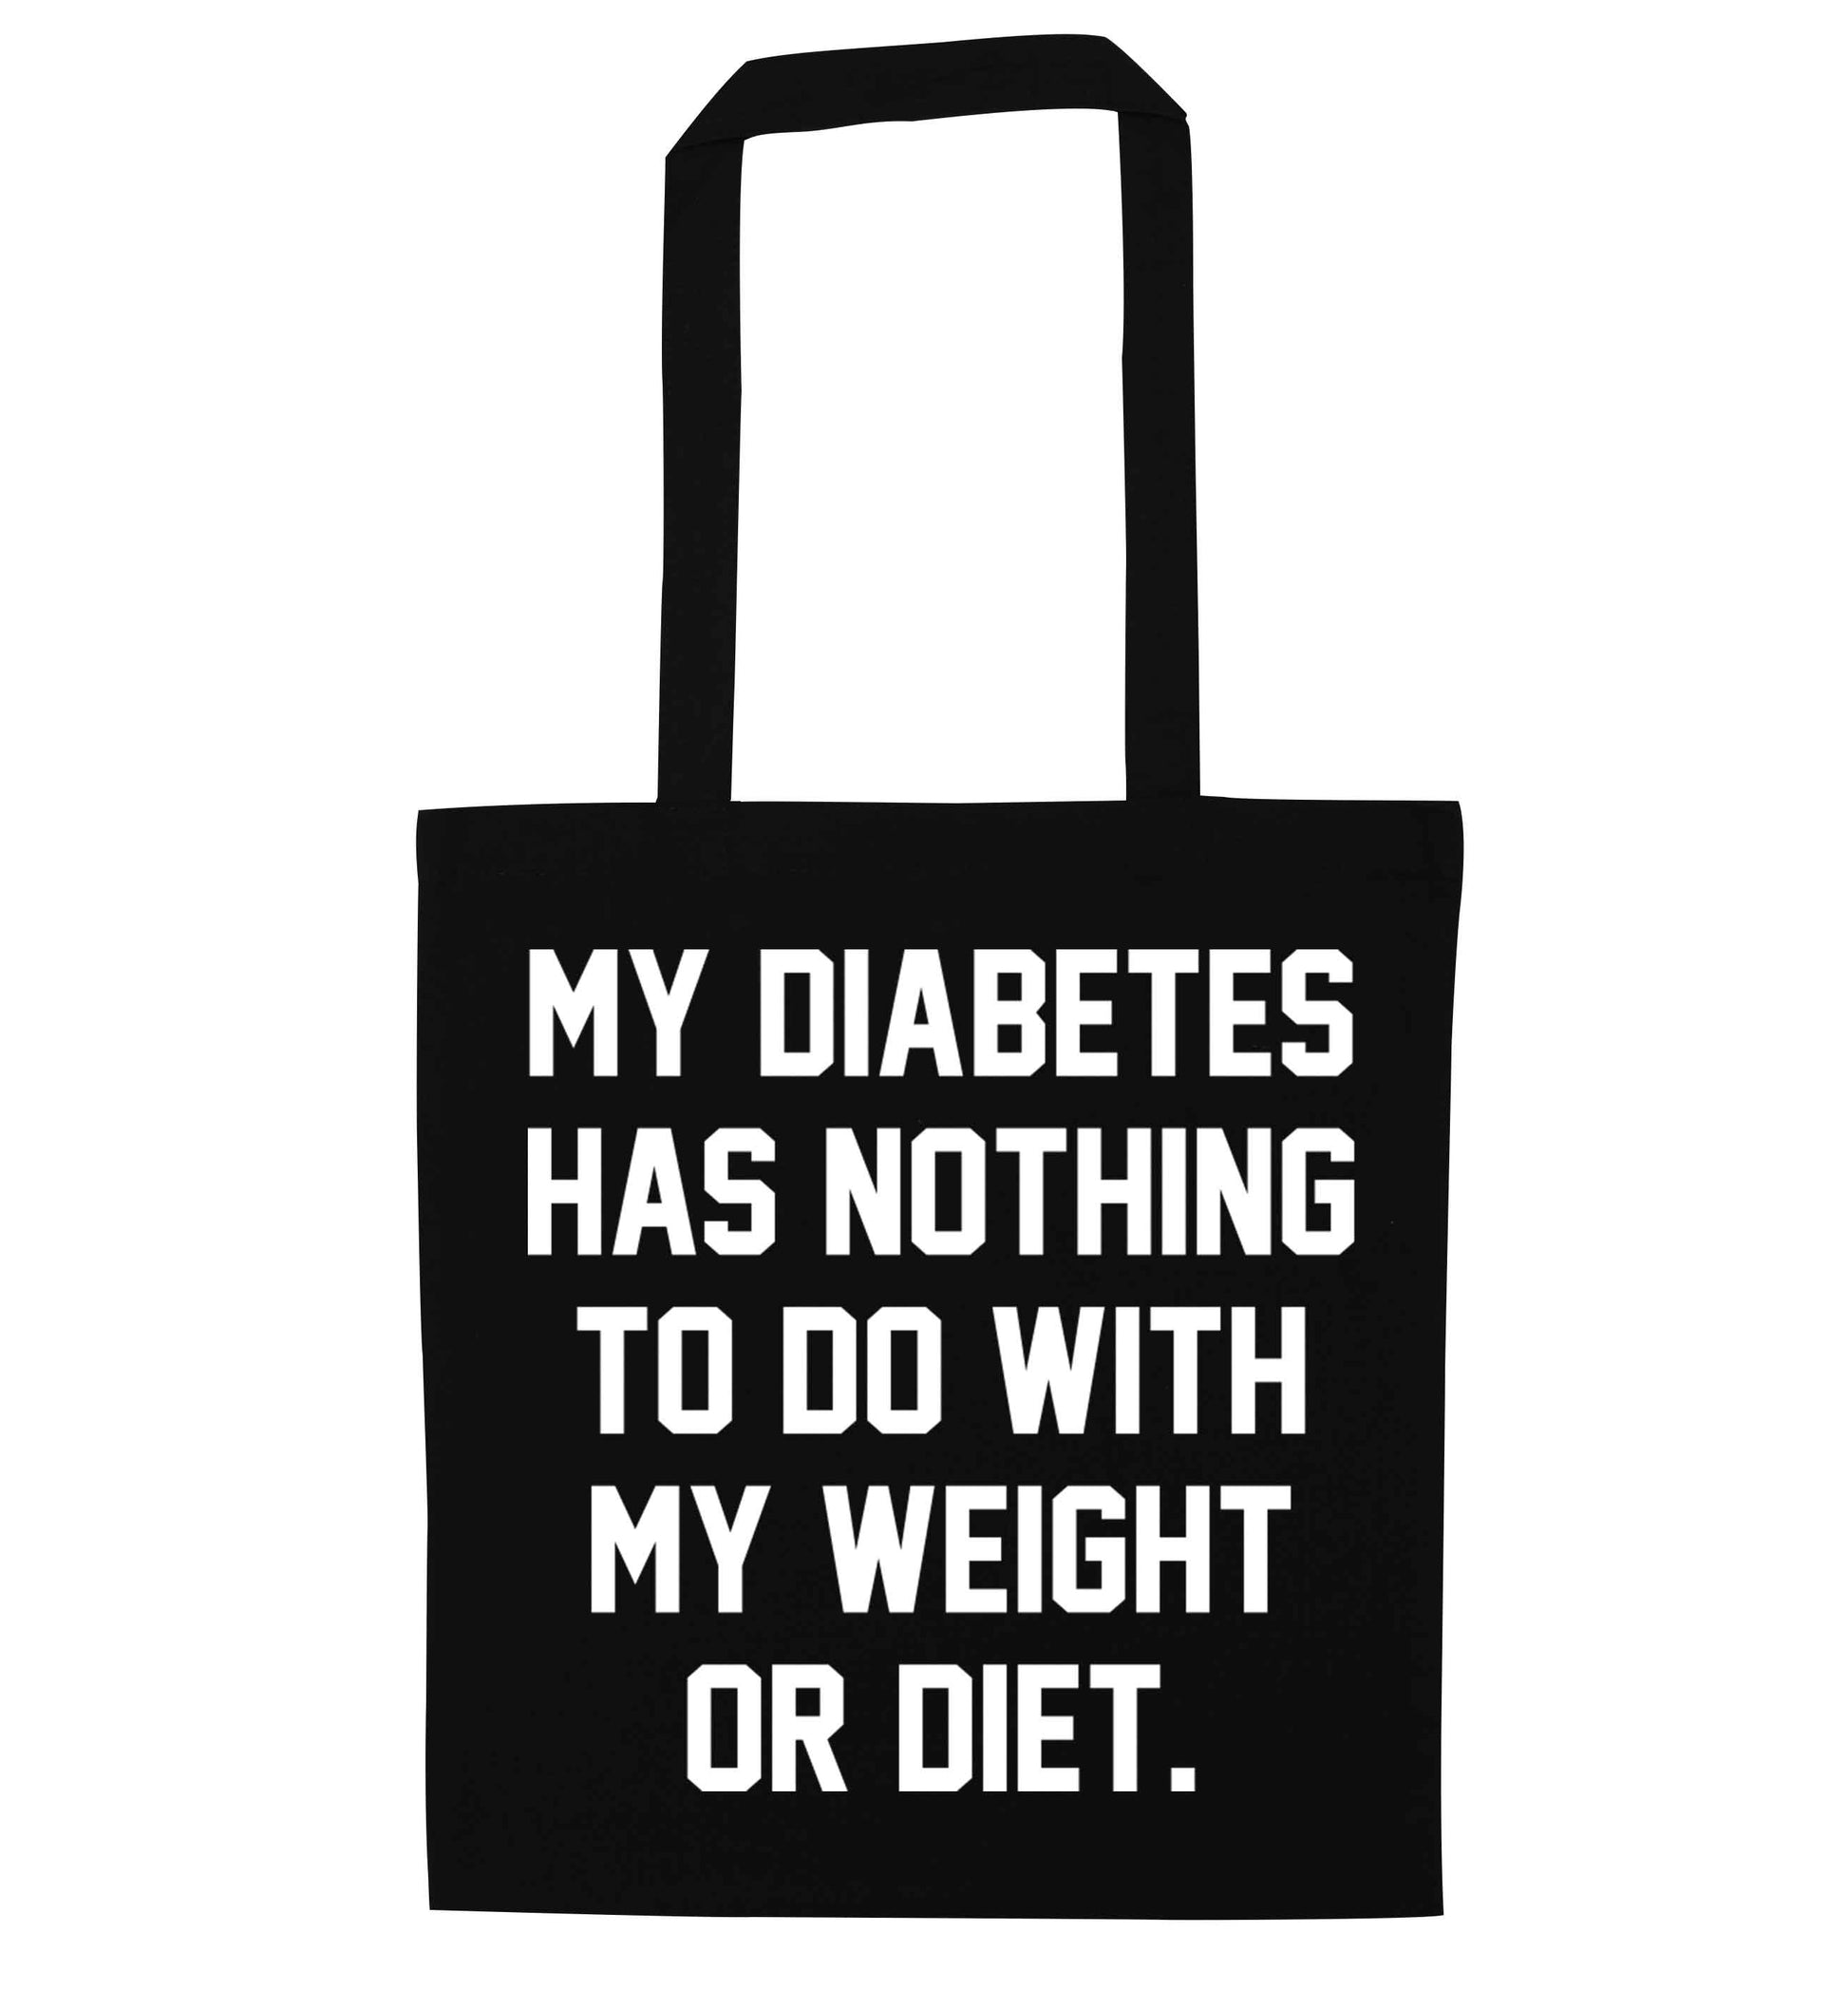 My diabetes has nothing to do with my weight or diet black tote bag